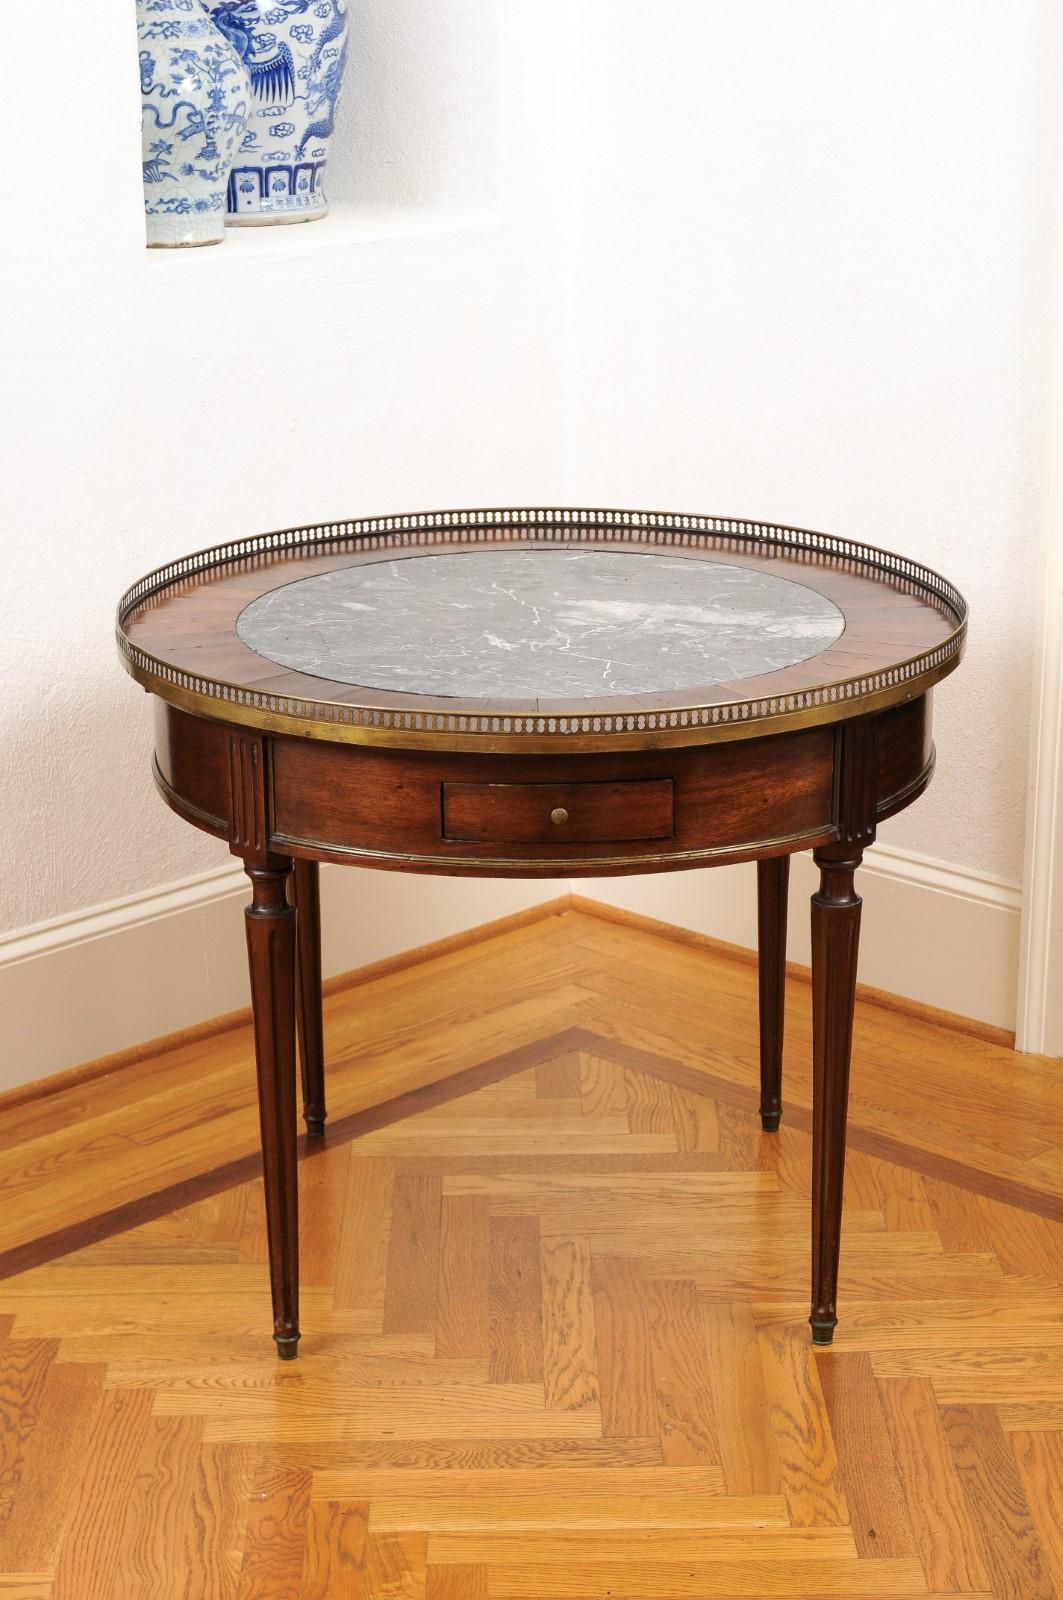 A French Napoléon III period bouillotte table from the mid-19th century, with marble top and pierced gallery. Created in France at the beginning of the reign of Emperor Napoléon III, this bouillotte table features a circular top with grey marble